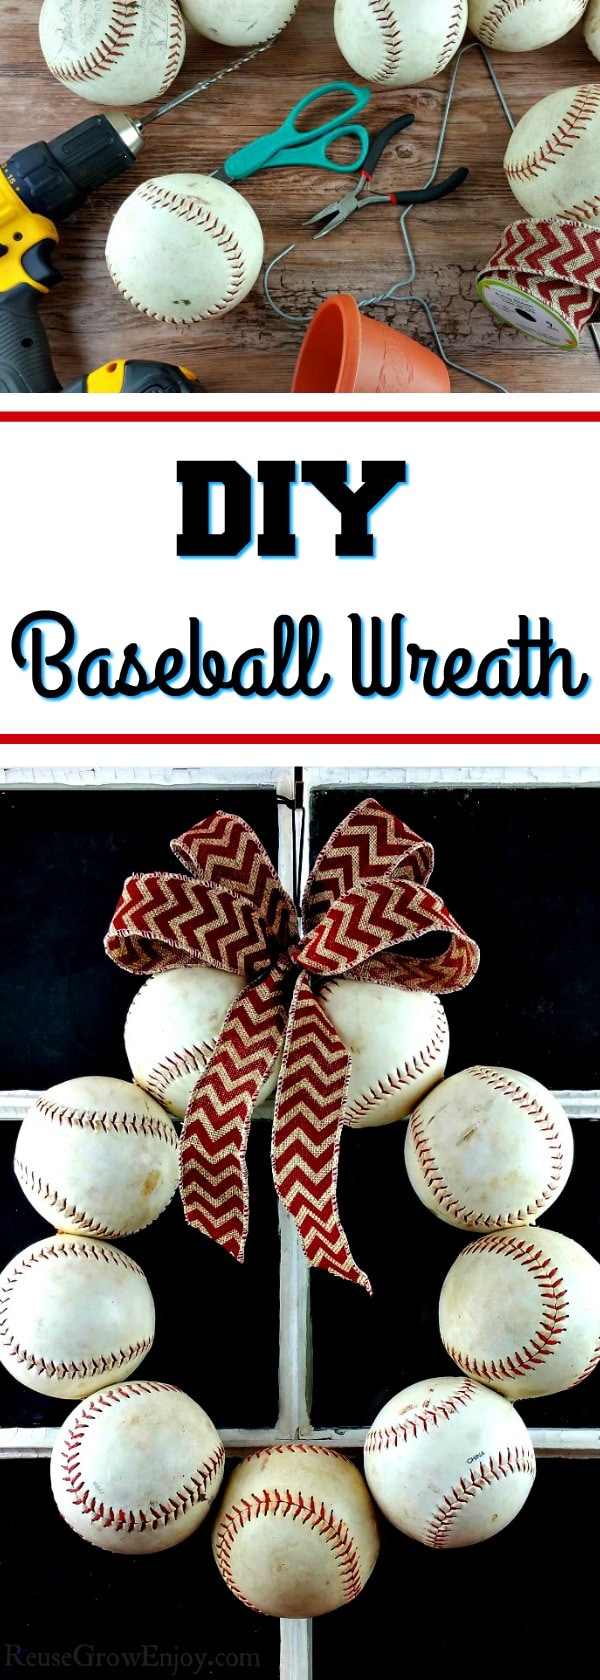 Need a new wreath for your door? If you like baseball, I have a project for you to try. It is a DIY Baseball Wreath - upcycled from old balls and a coat hanger.